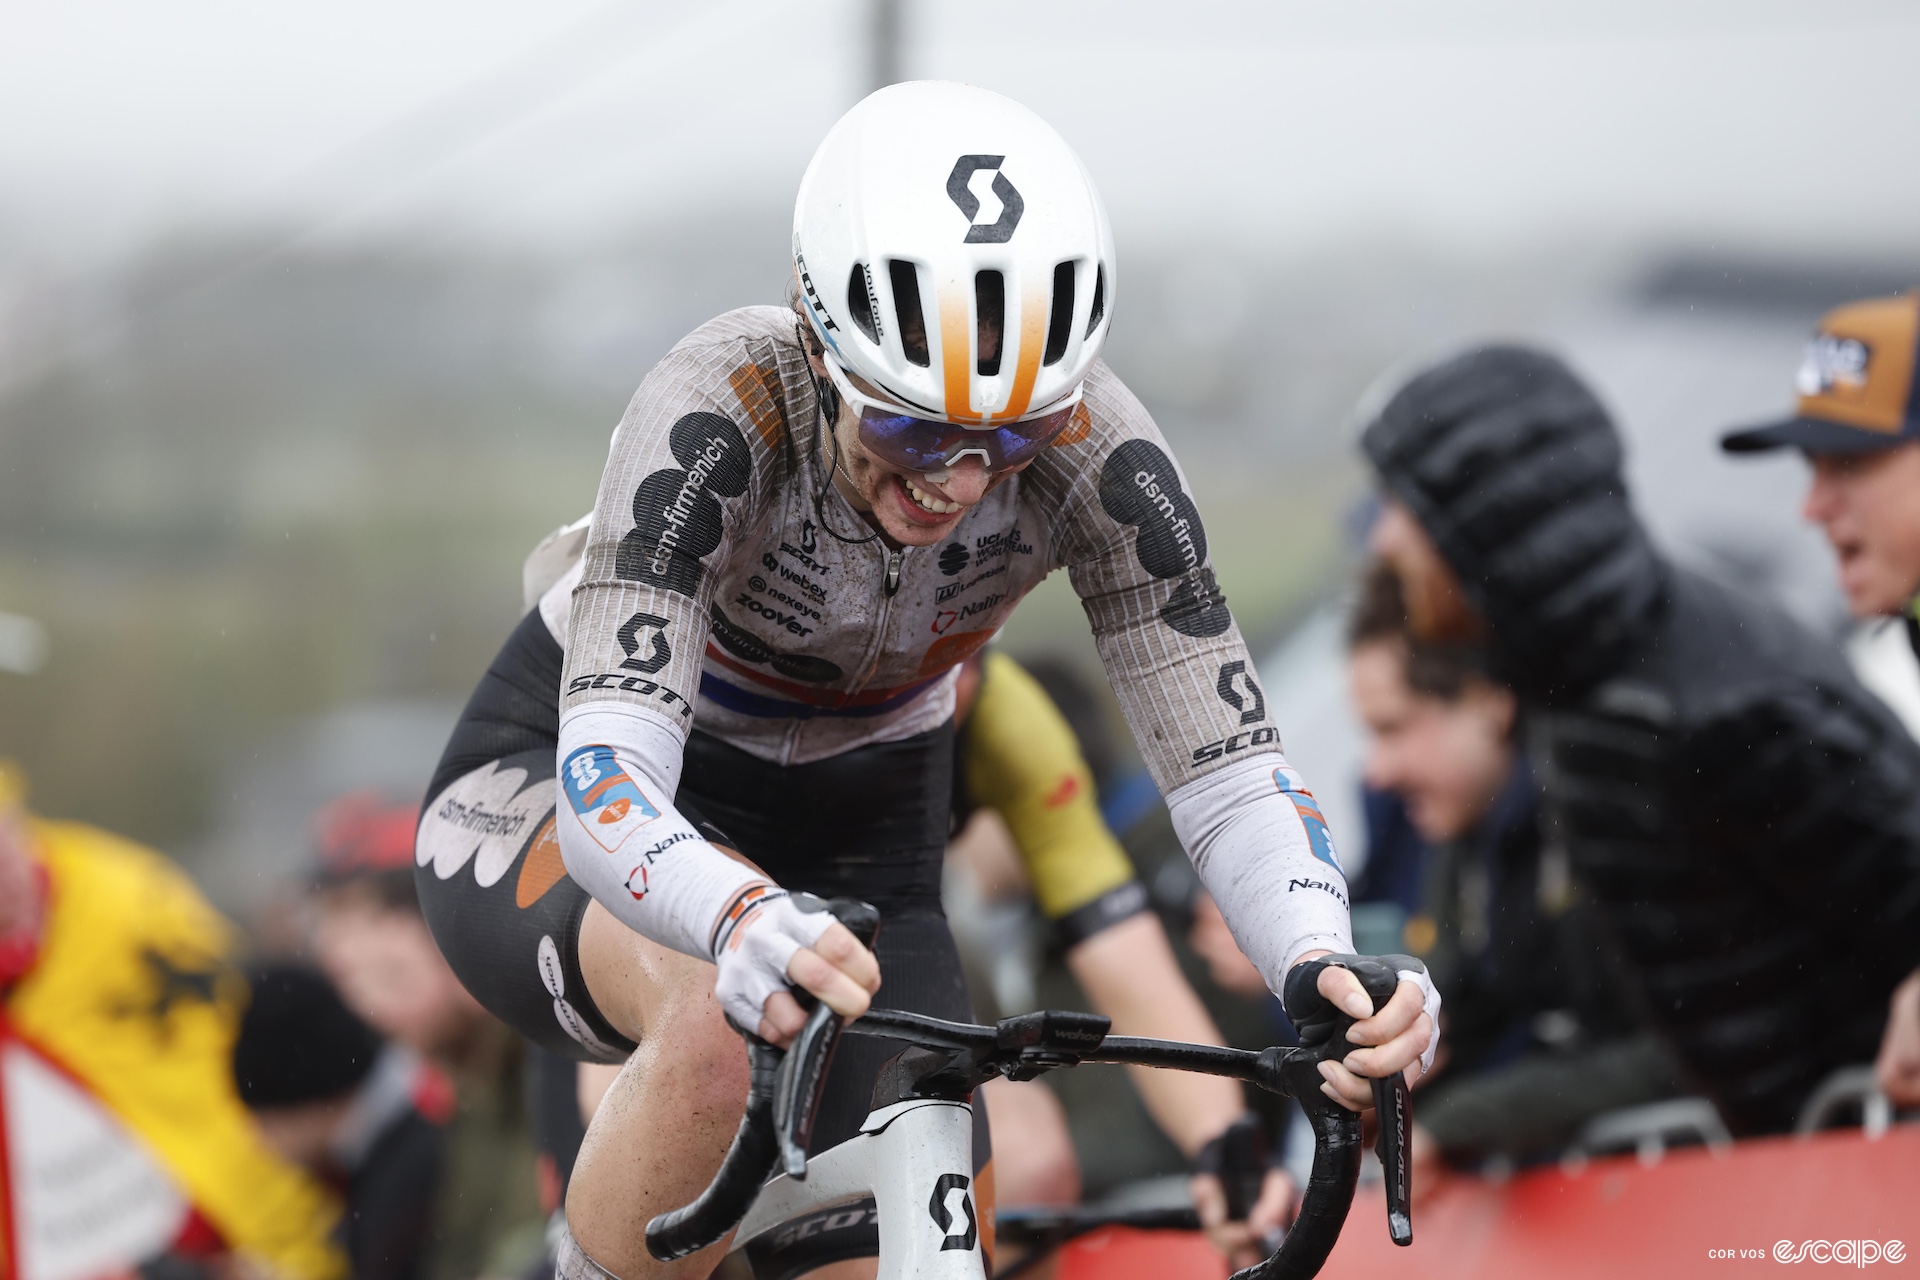 Pfeiffer Georgi digs deep to climb a section of cobbles at the Tour of Flanders. Her white DSM kit is covered in grey-brown dirt and mud.